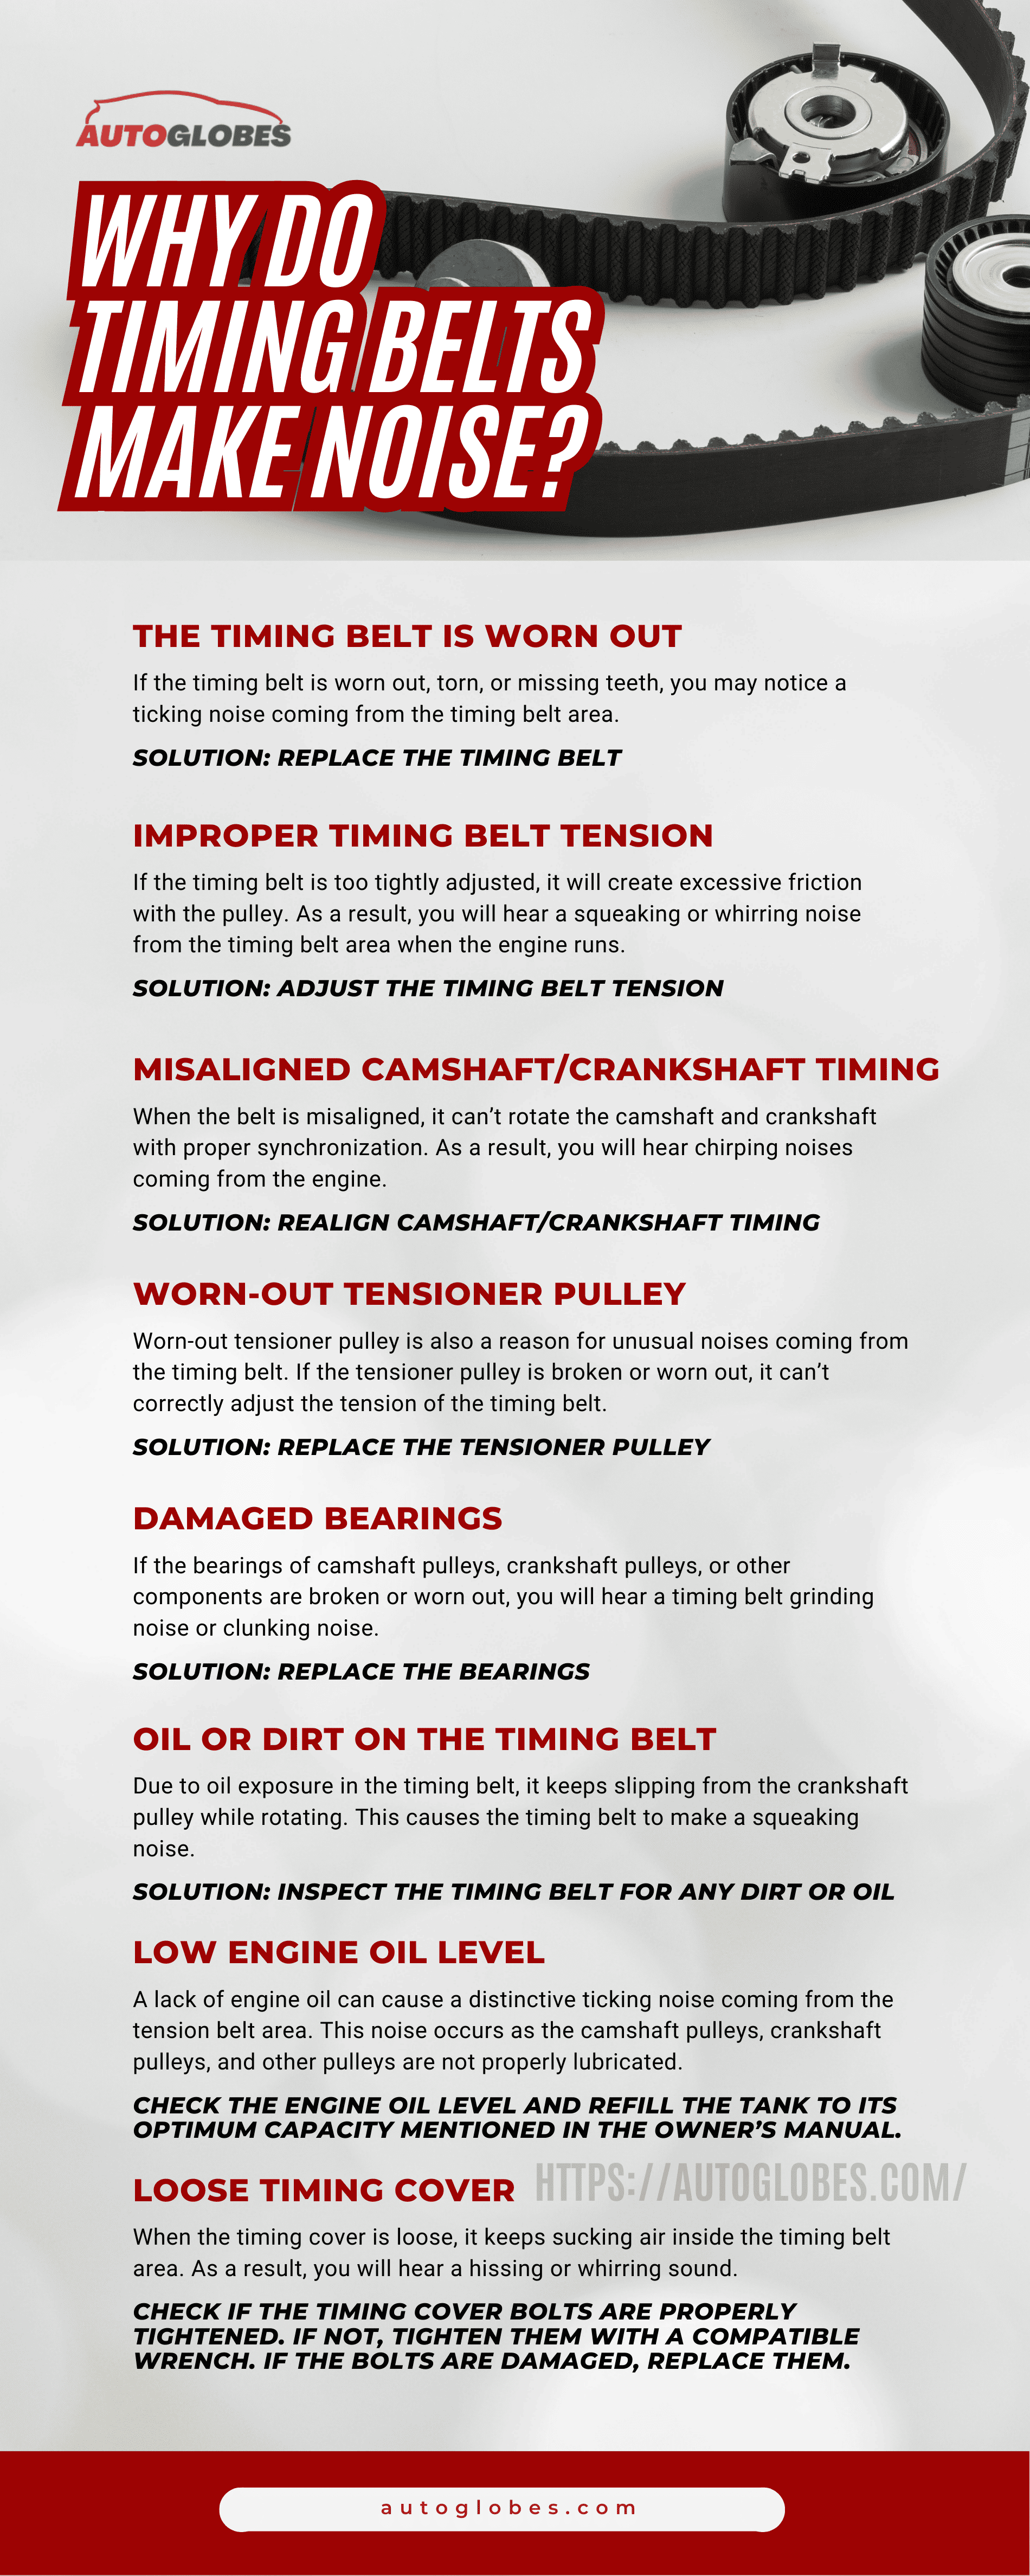 Why Do Timing Belts Make Noise Infographic